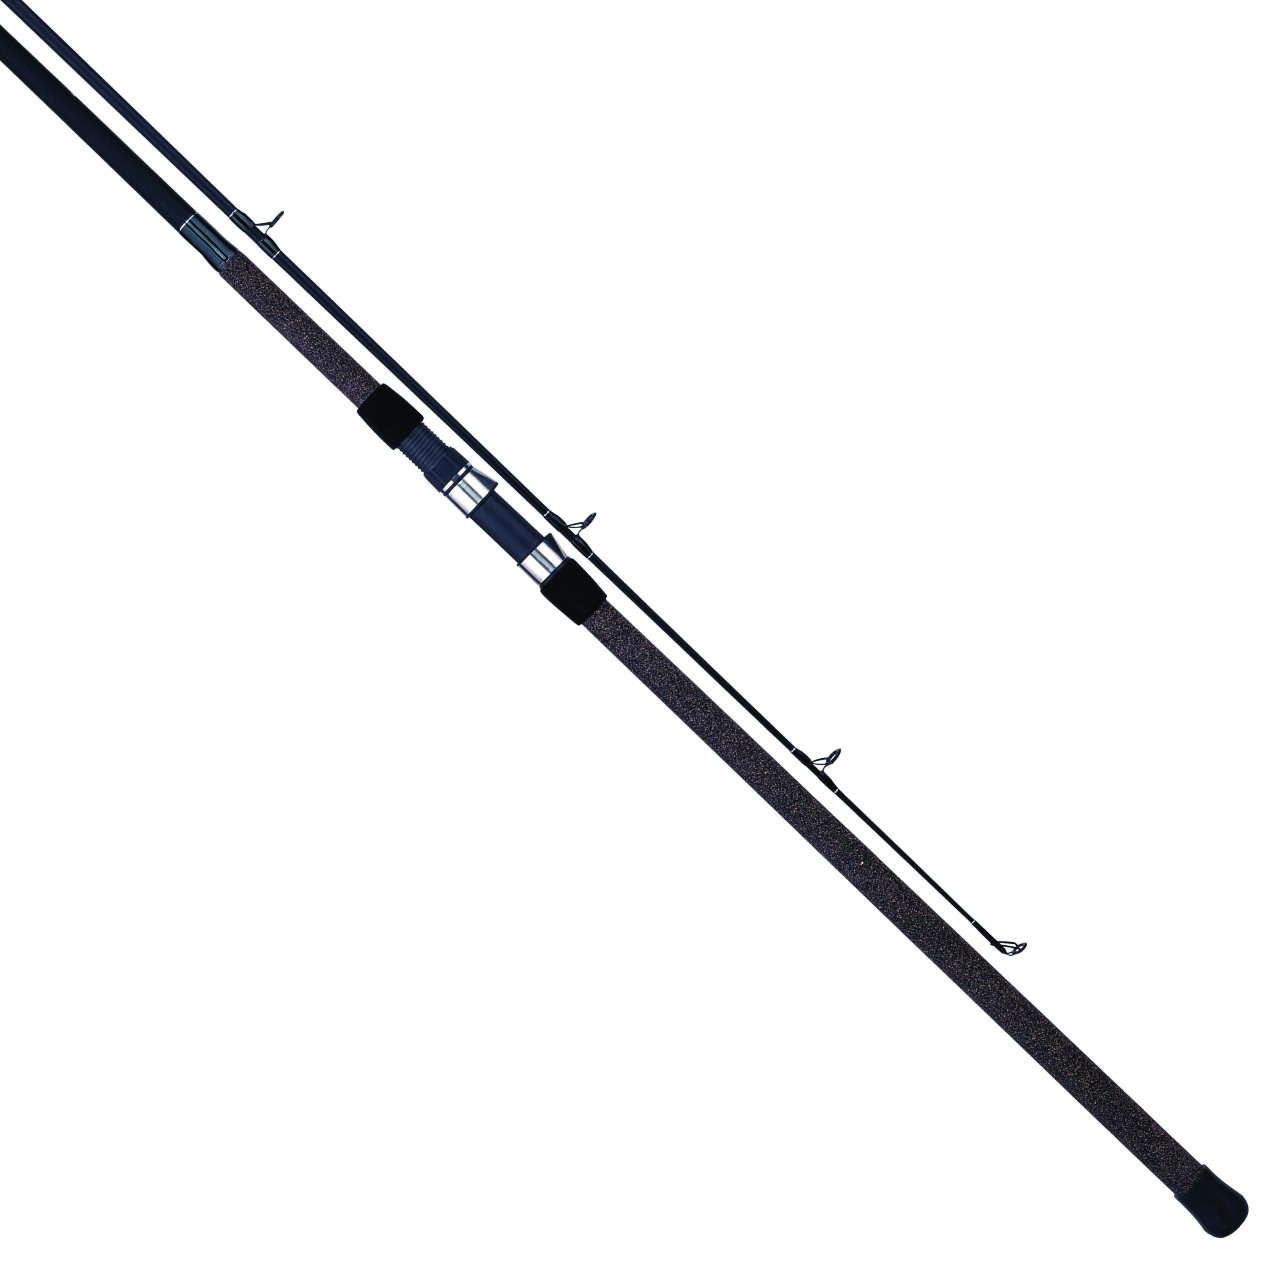 Tica Tica Tc2-Ueha Surf Spin Rod, 1 Piece, Moderate/Fast, Medium 1/2-2oz  Lures, 6lb - 17lb, 5 Guides + Tip UE-HA421301S , $6.00 Off with Free S&H —  CampSaver